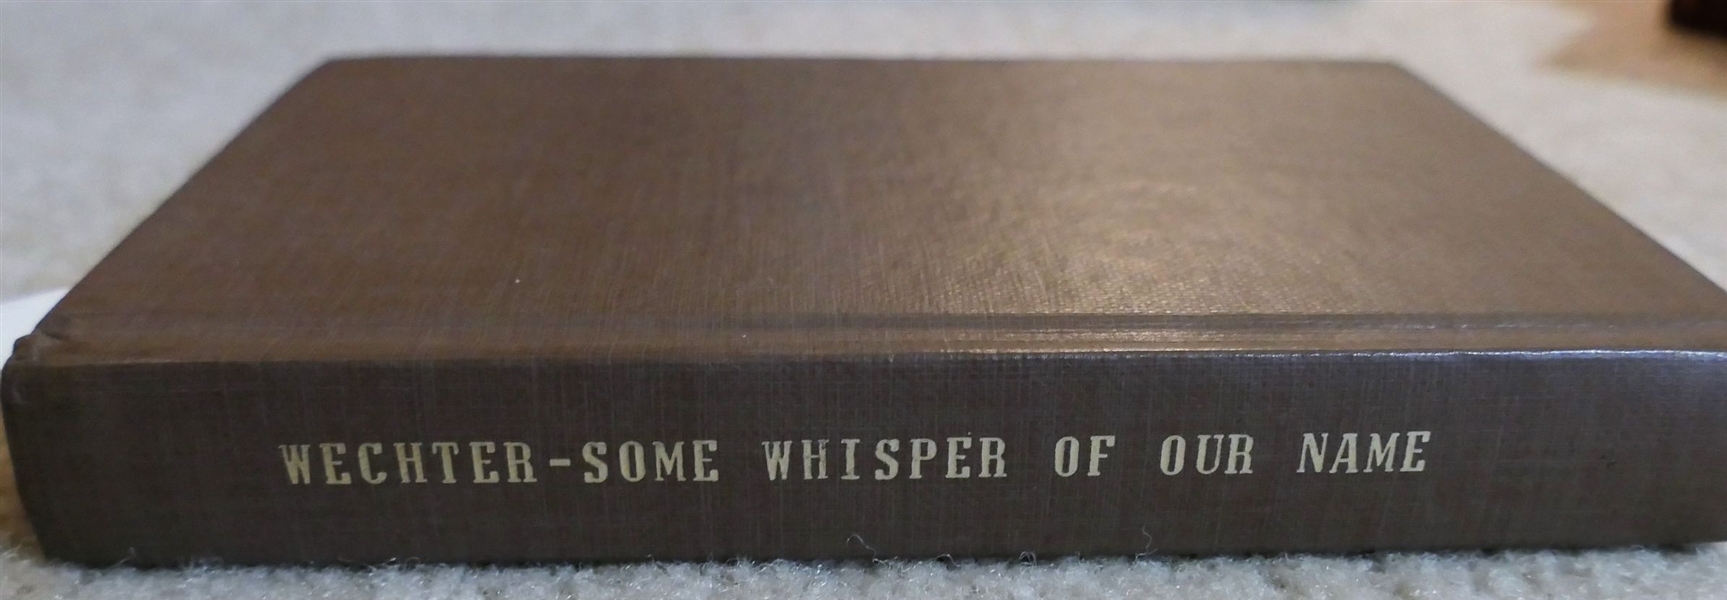 Some Whisper of Our Name? by Nell Wise Wechter - 1975 Times Printing Company - Hardcover First Edition 